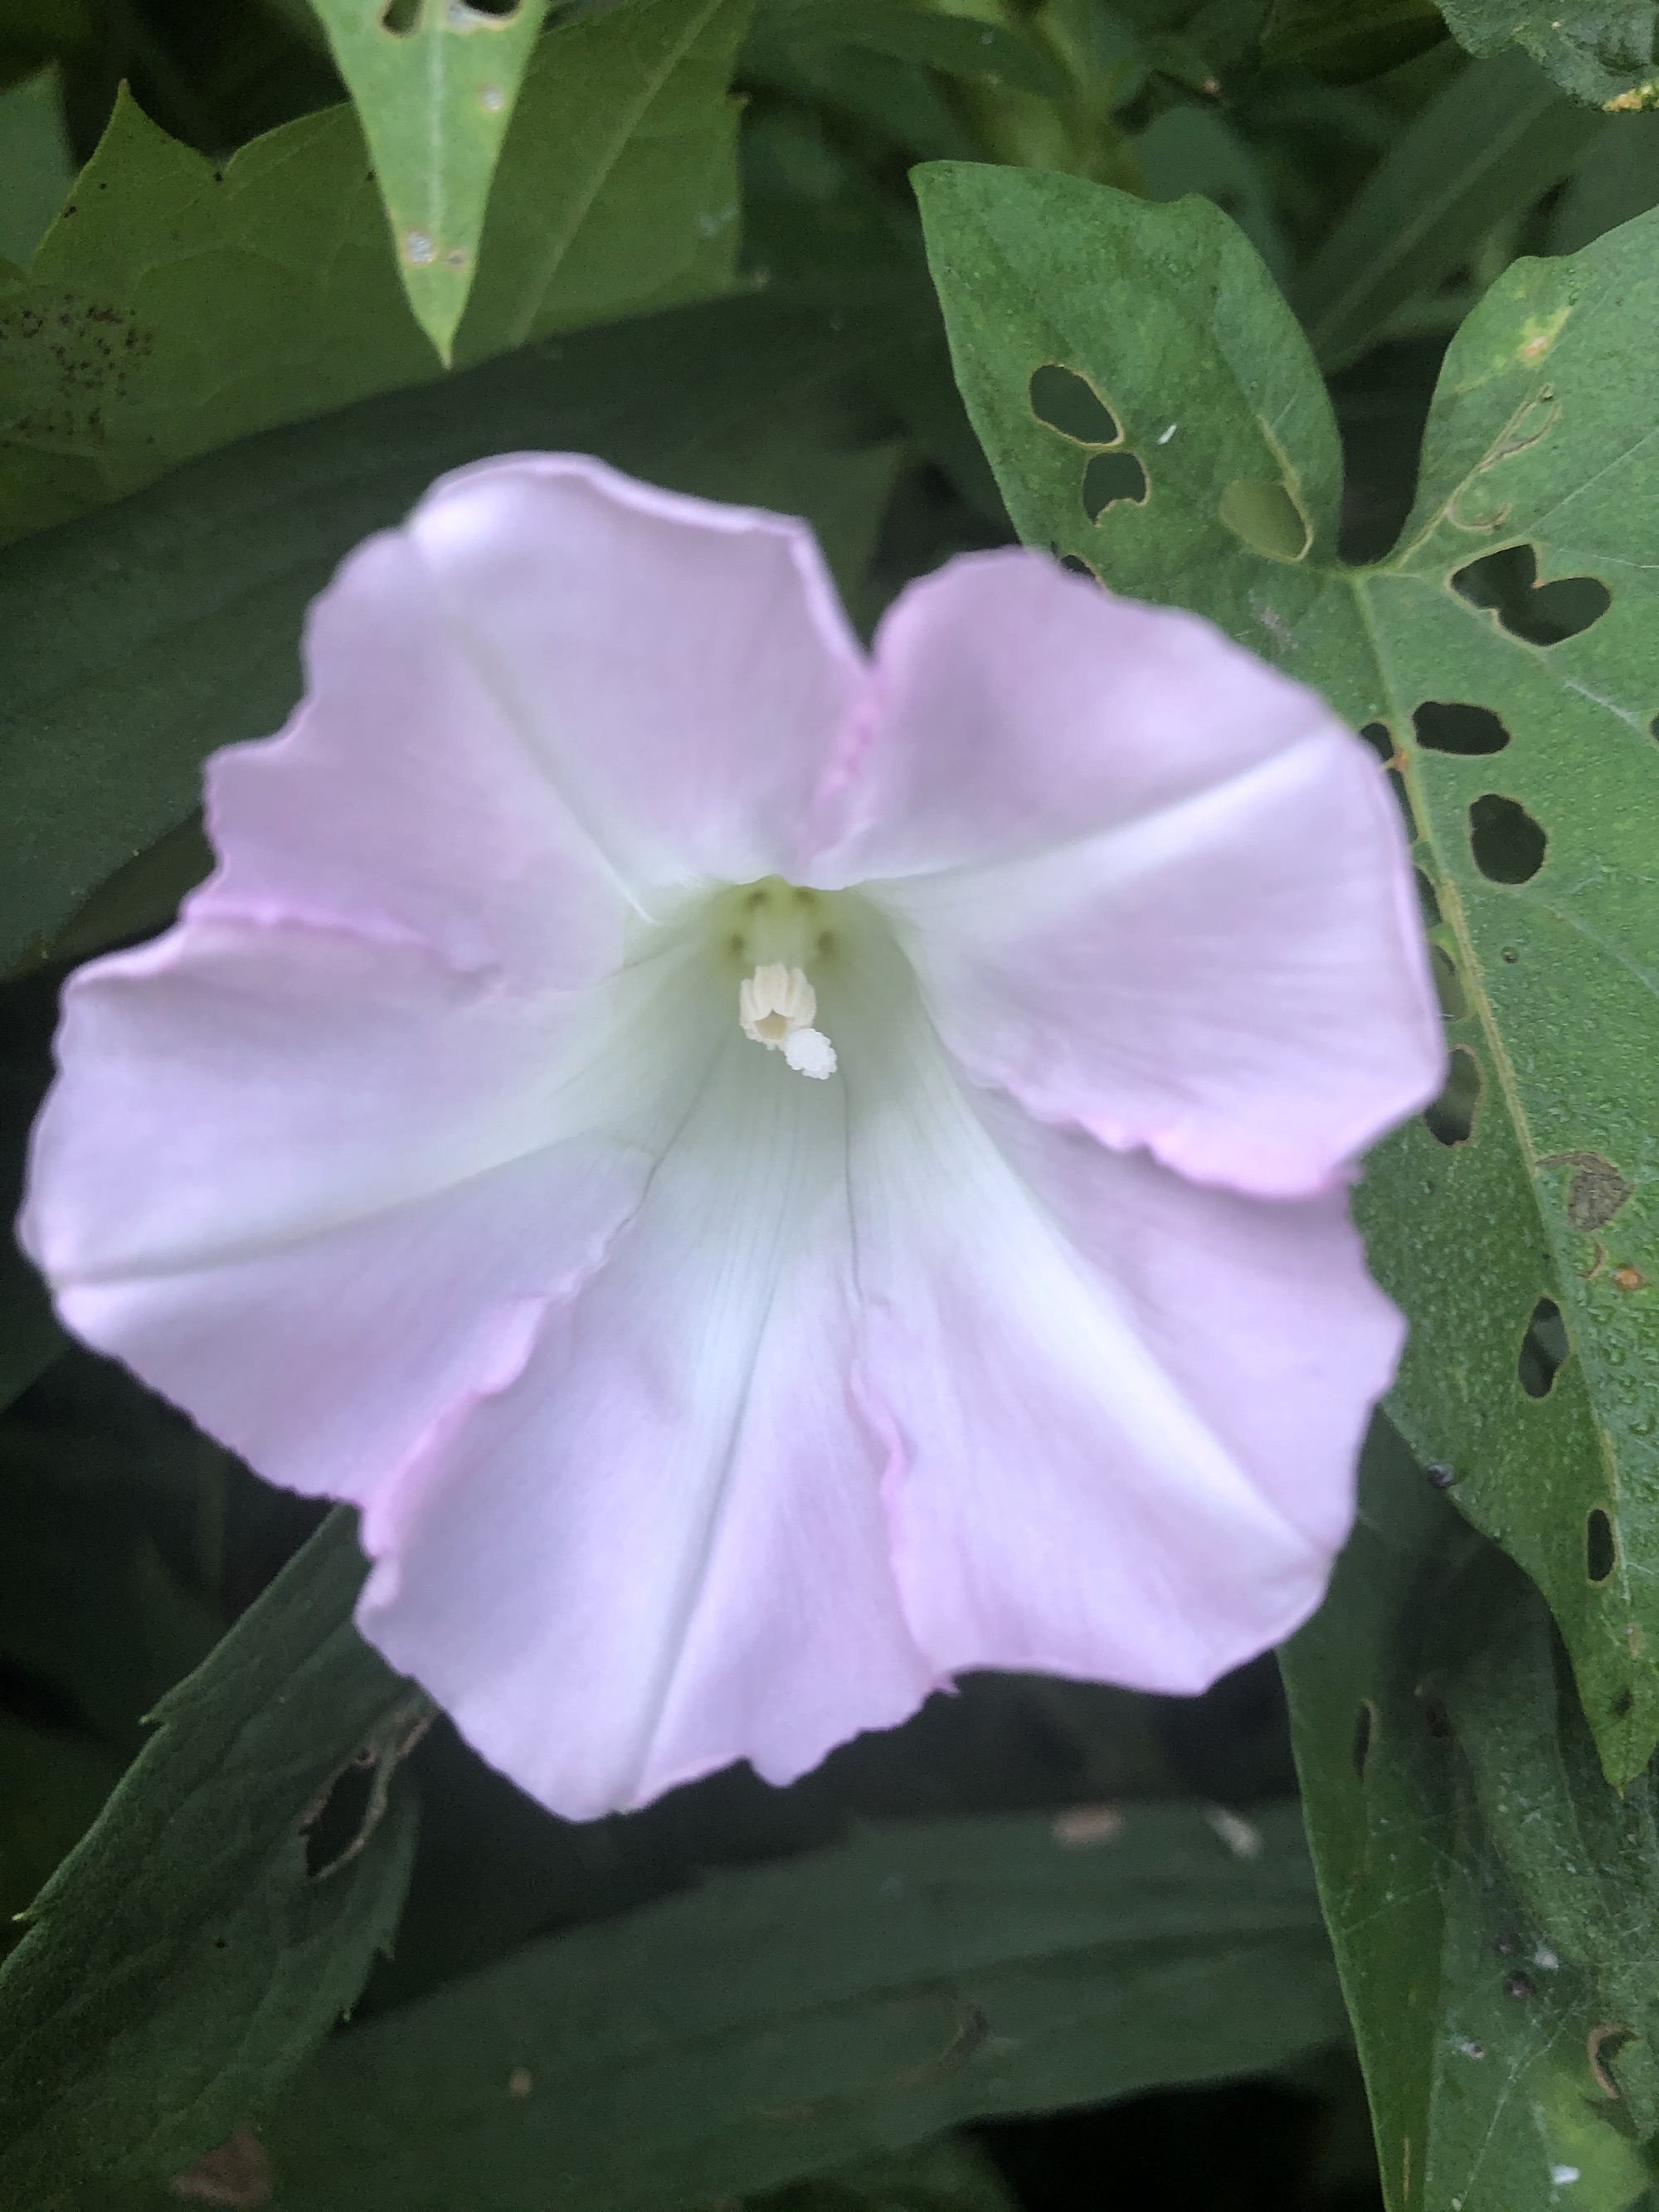 Hedge Bindweed on shore of Marion Dunn Pond in Madison, Wisconsin on July 24, 2020.